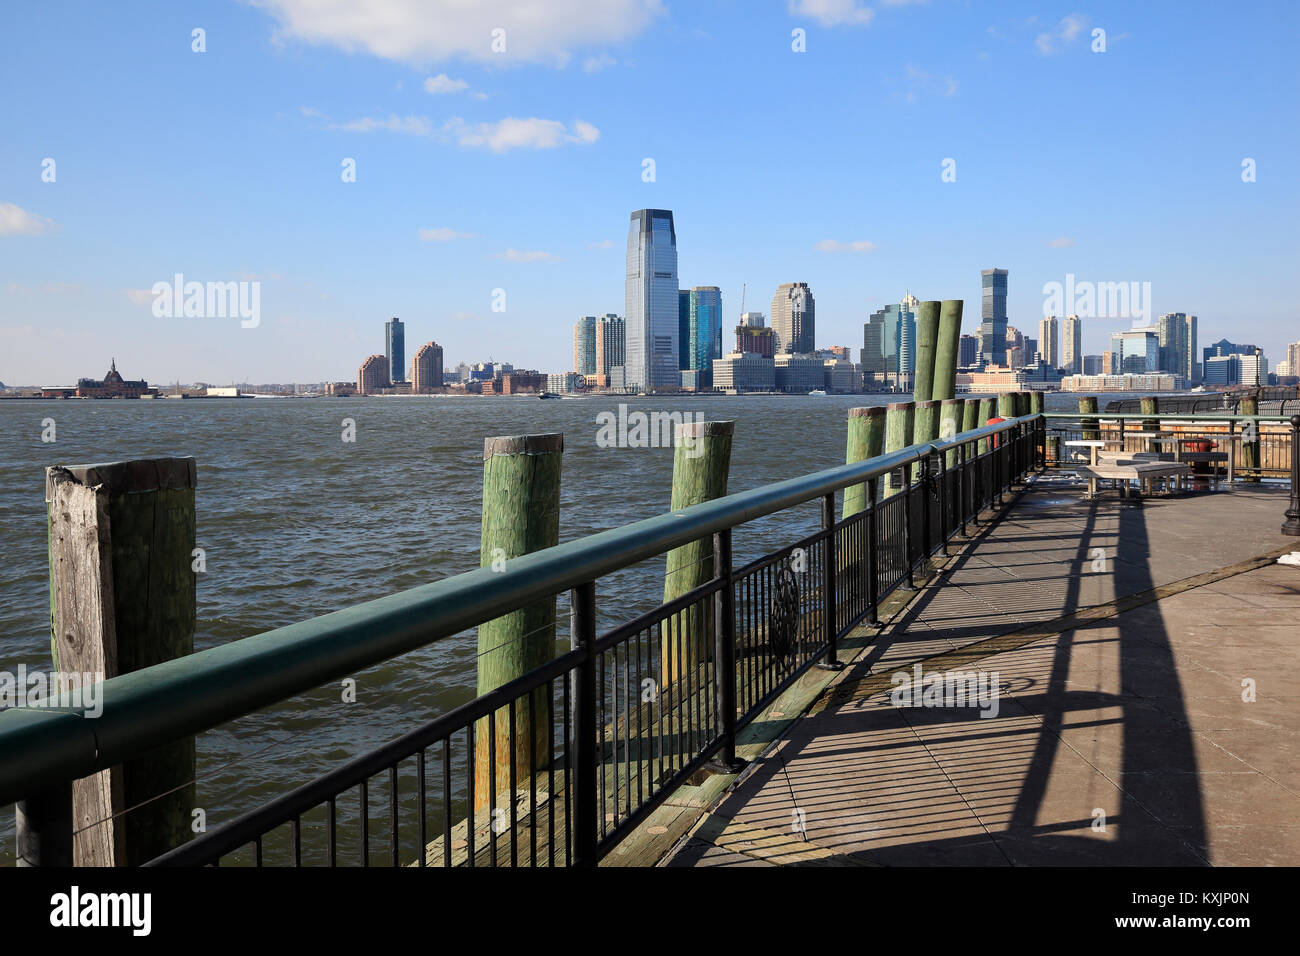 Jersey City And Hudson River Seen From Battery Park Promenade In New Stock Photo Alamy